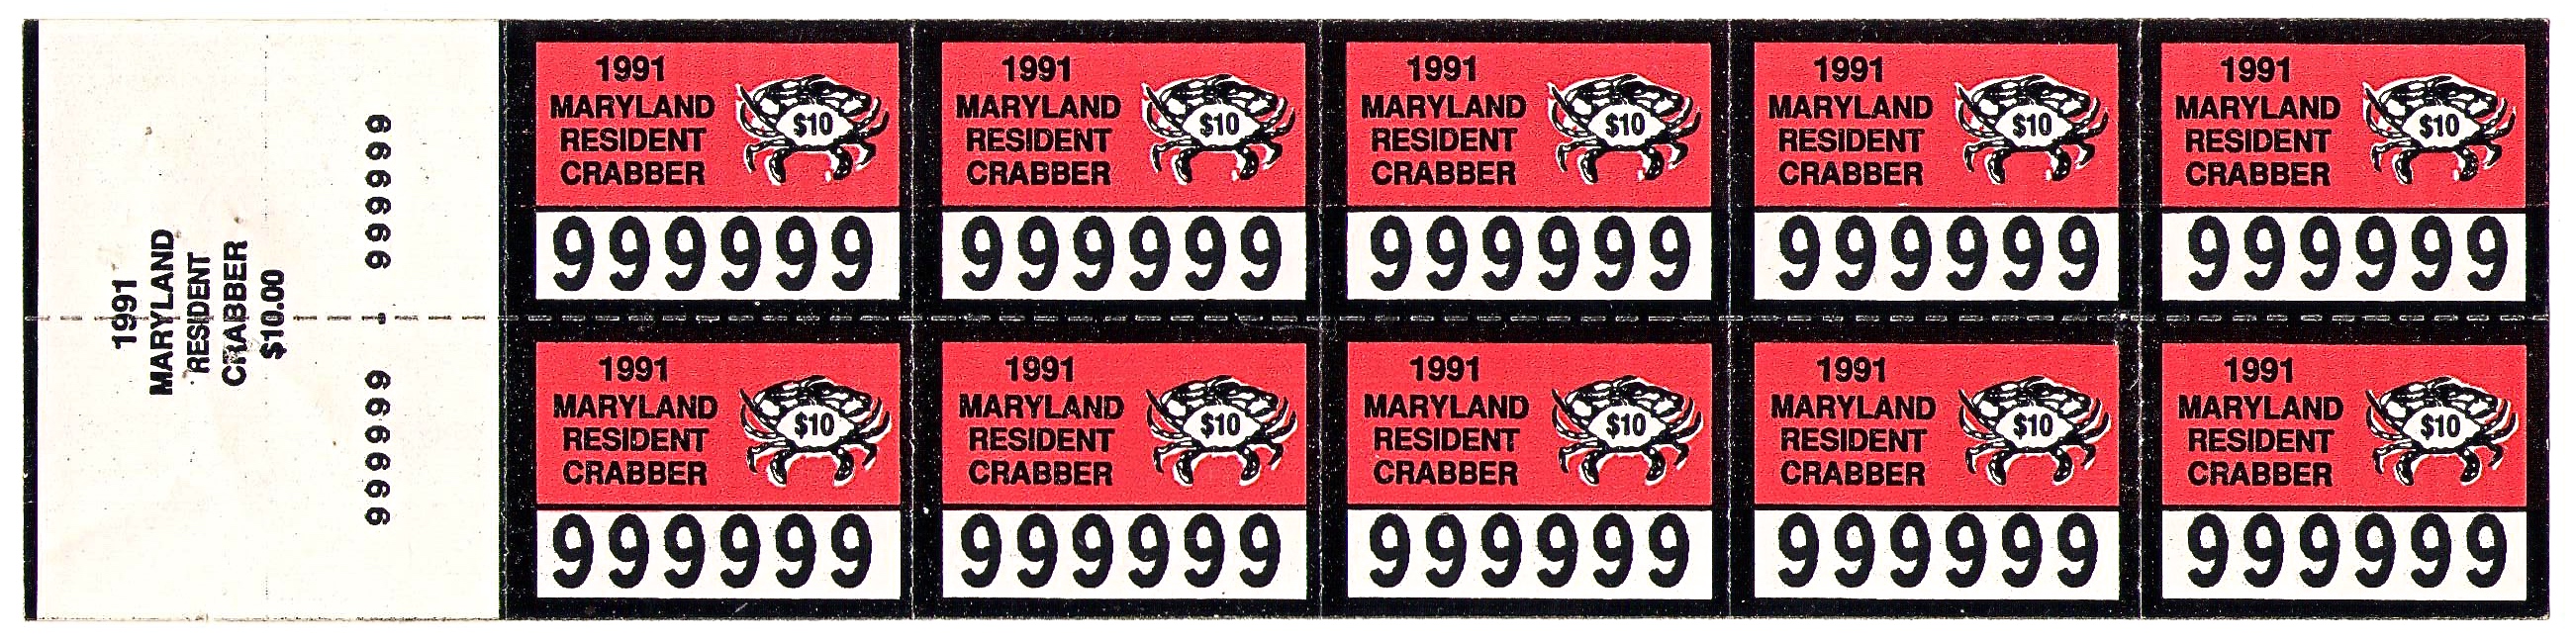 1991 Maryland Resident Crabber Complete Proof Pane